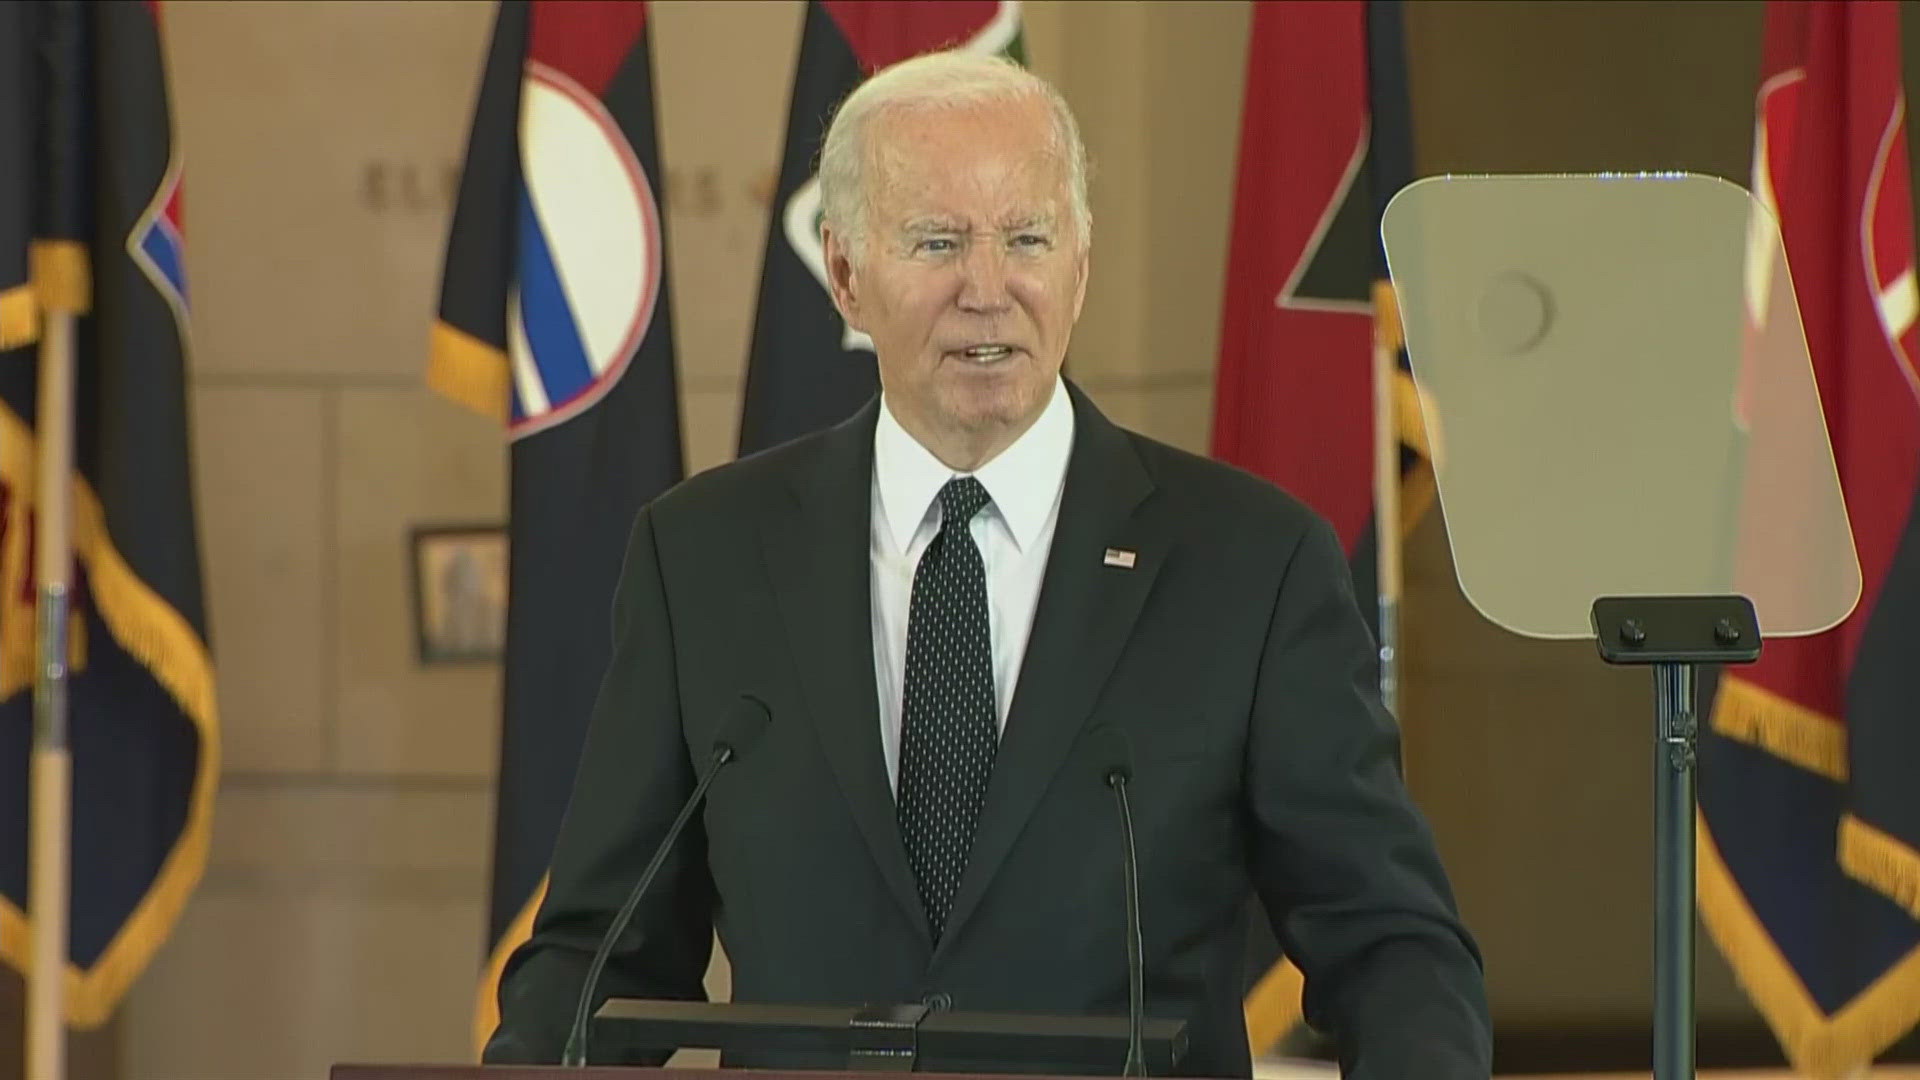 President Biden issued a forceful condemnation of antisemitism during a ceremony to remember victims of the Holocaust.